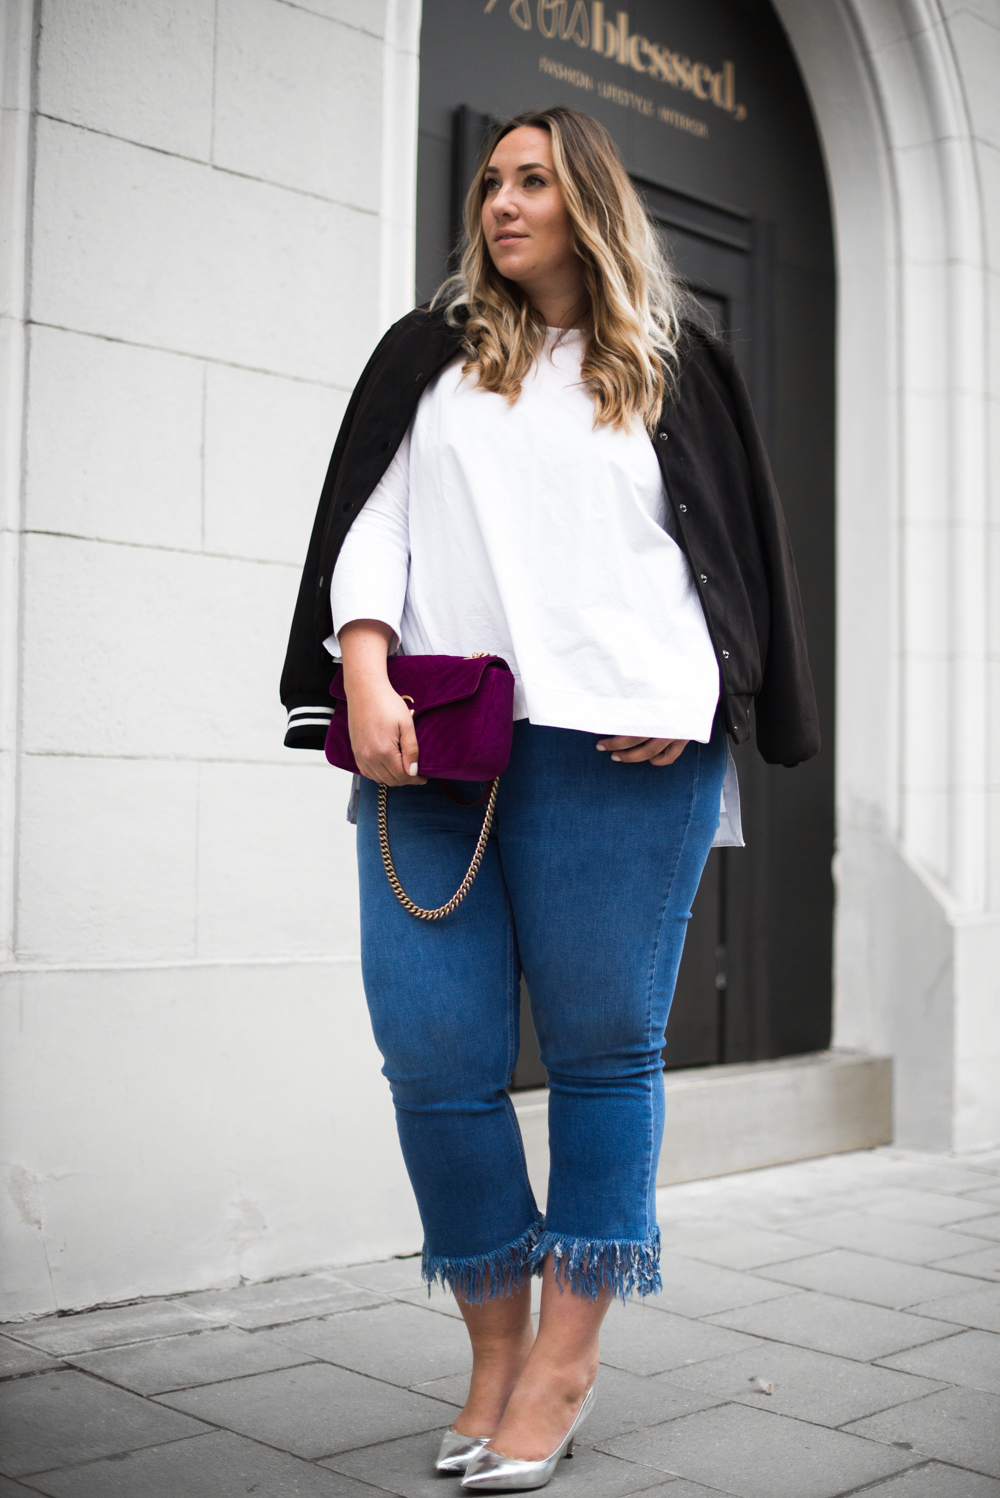 Gucci_The Skinny and the Curvy One_Ms wunderbar_Plus Size Blogger_curve blog_Fashionblog Deutschland_Plus Size Fashion Deutschland_College Jacke_Fringe Jeans (8 von 15)